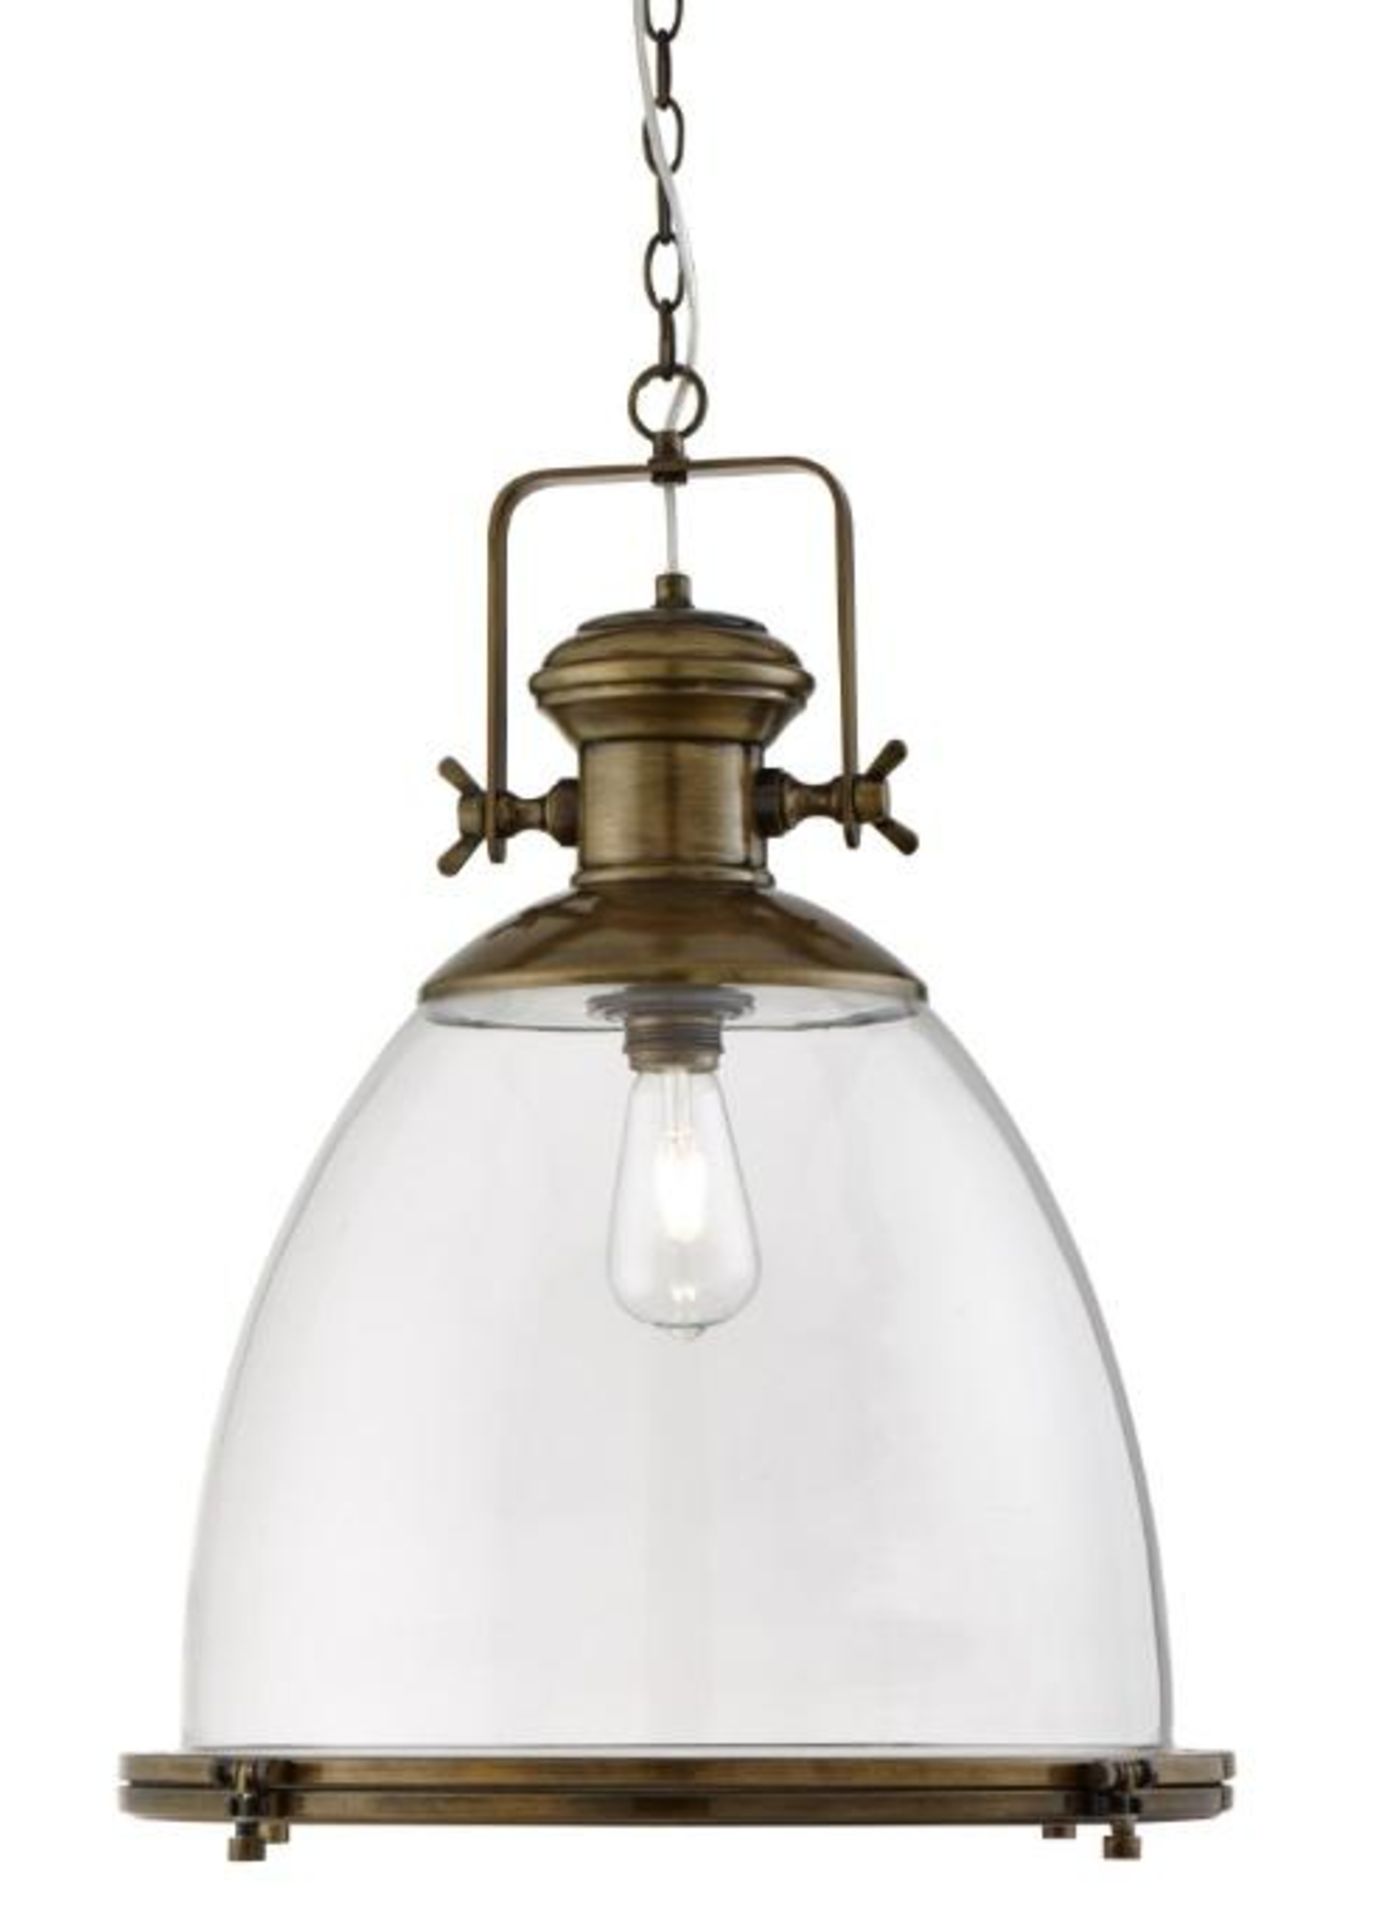 1 x Large 1-Light Industrial Pendant With A Painted Antique Brass Finish, With Clear Glass - Image 2 of 2